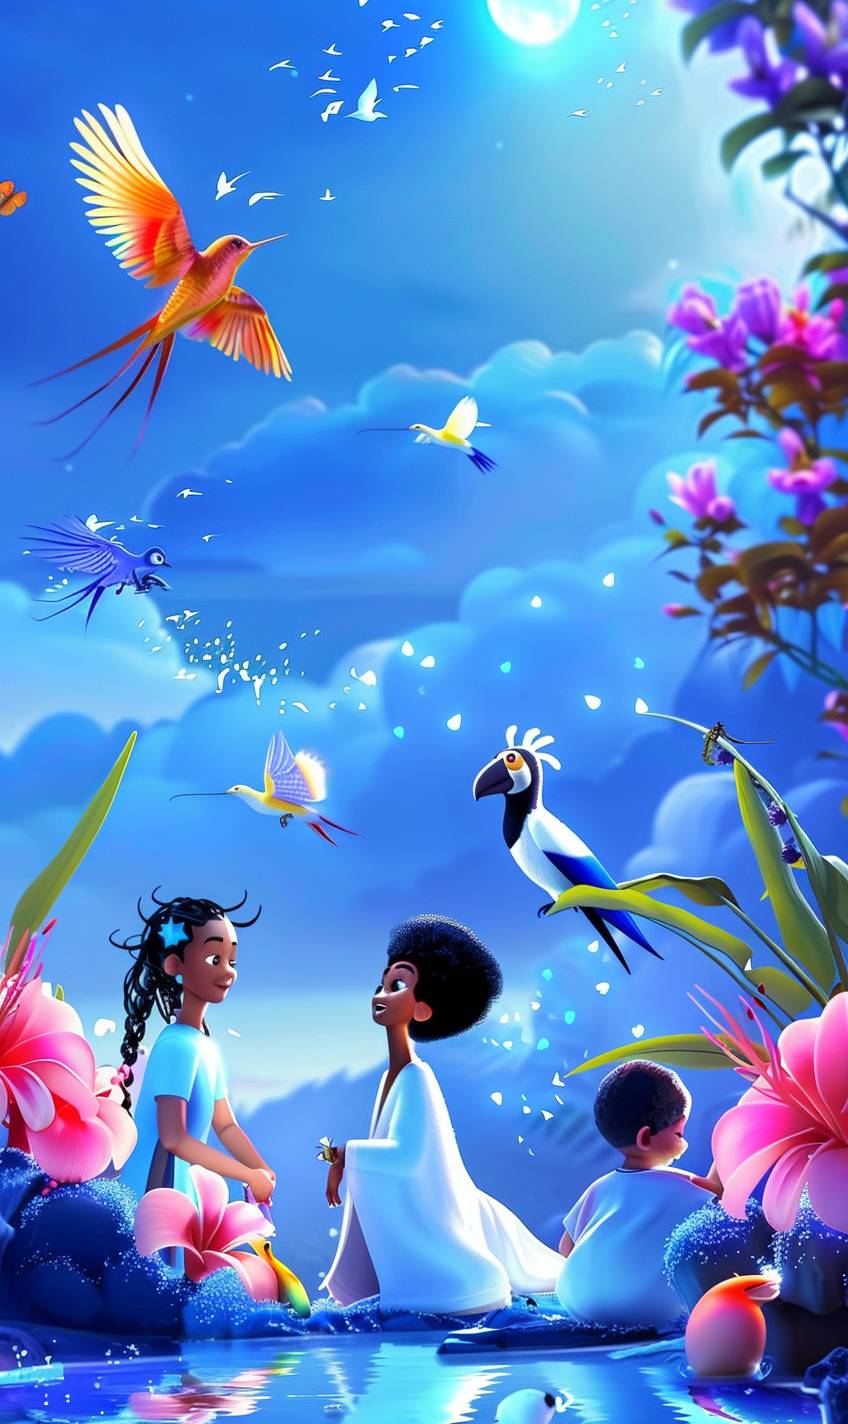 A dynamic and energetic illustration featuring an eclectic mix of characters from different backgrounds, ages, and cultures, coming together to celebrate friendship, diversity, and unity in a vibrant and lively setting. The artwork should exude a sense of inclusivity, joy, and togetherness, portraying a harmonious blend of personalities and styles in a visually compelling and engaging composition.